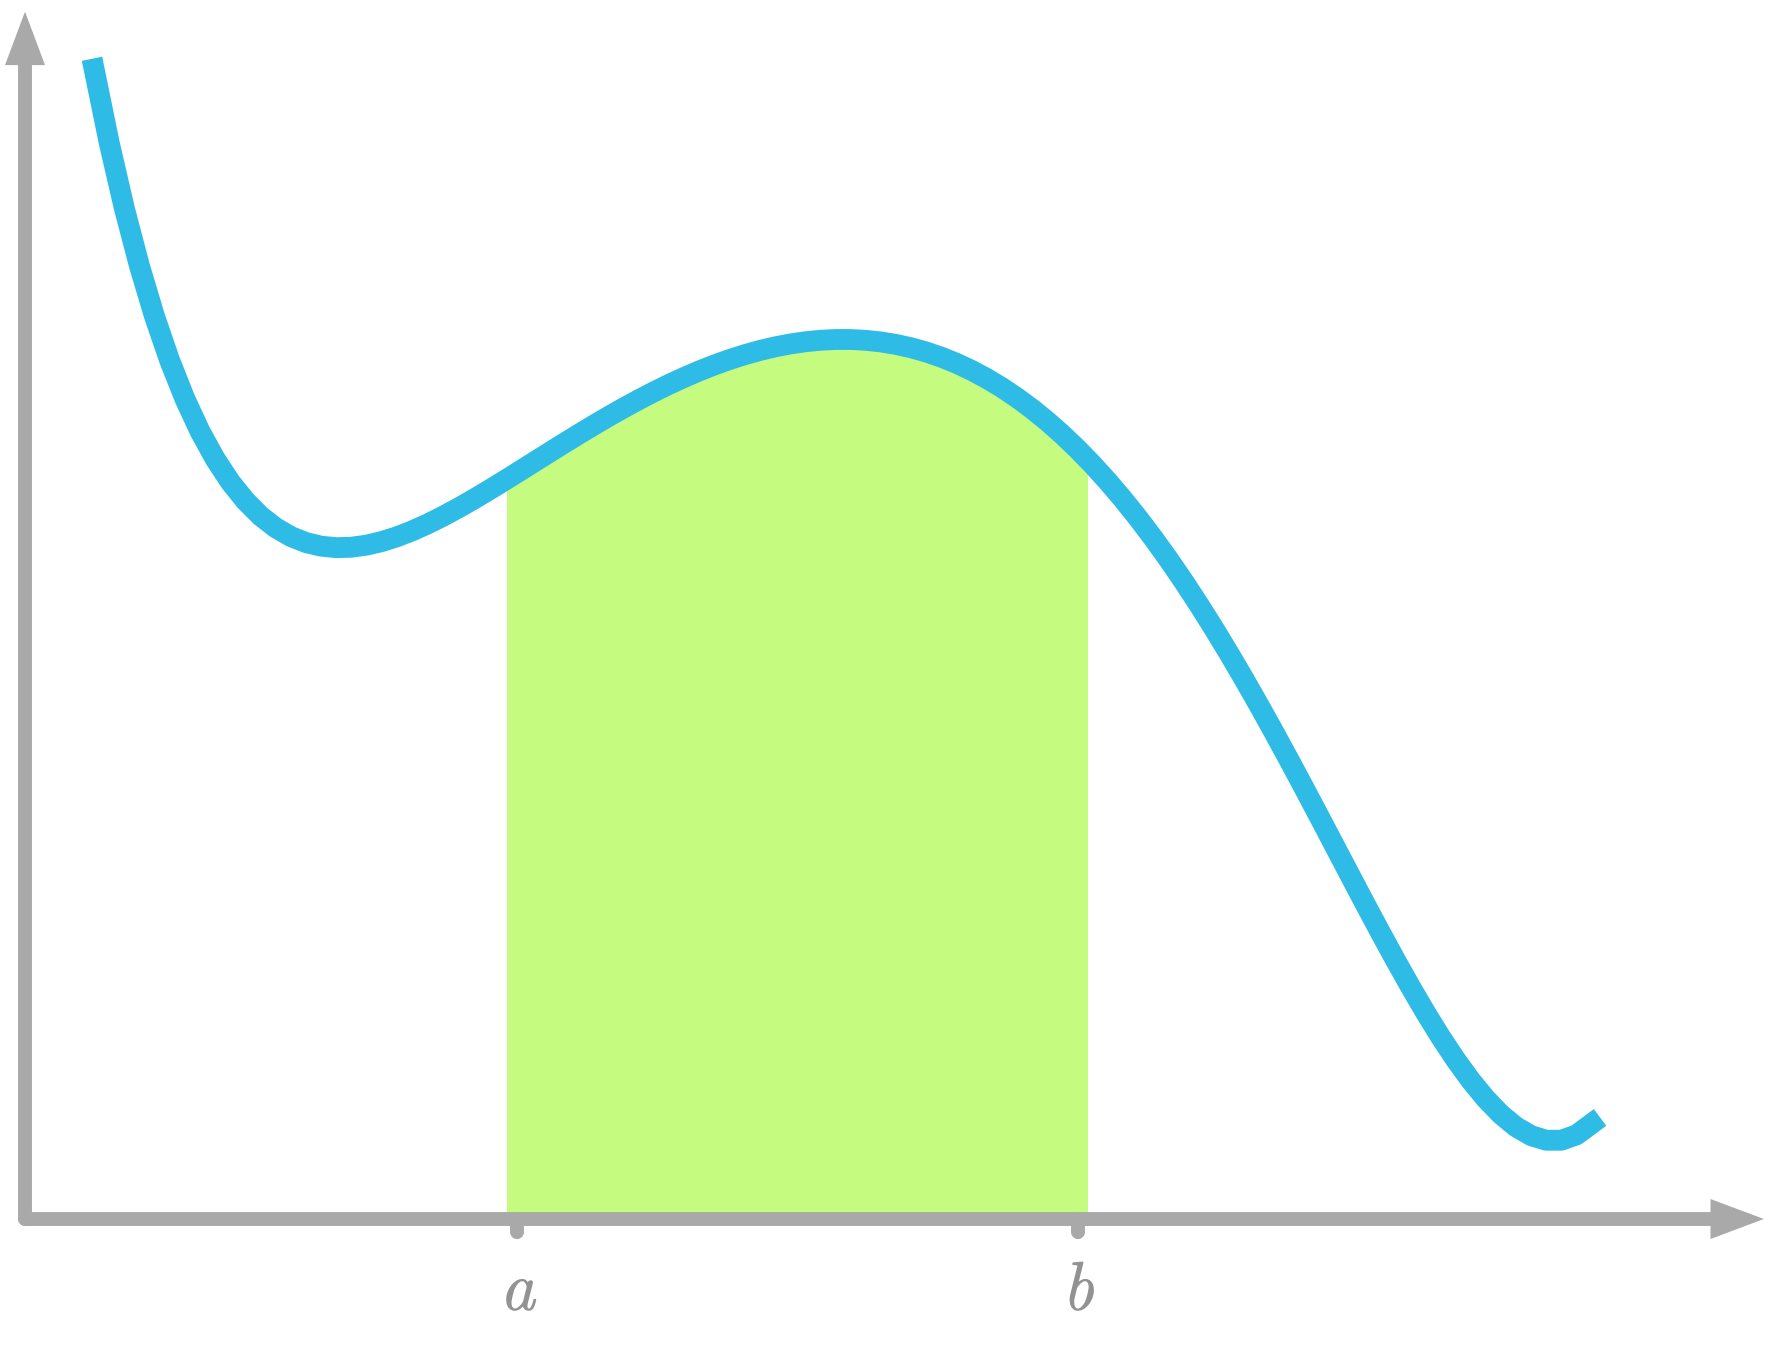 Figure 13: Area under the curve between $x=a$ and $x=b$.